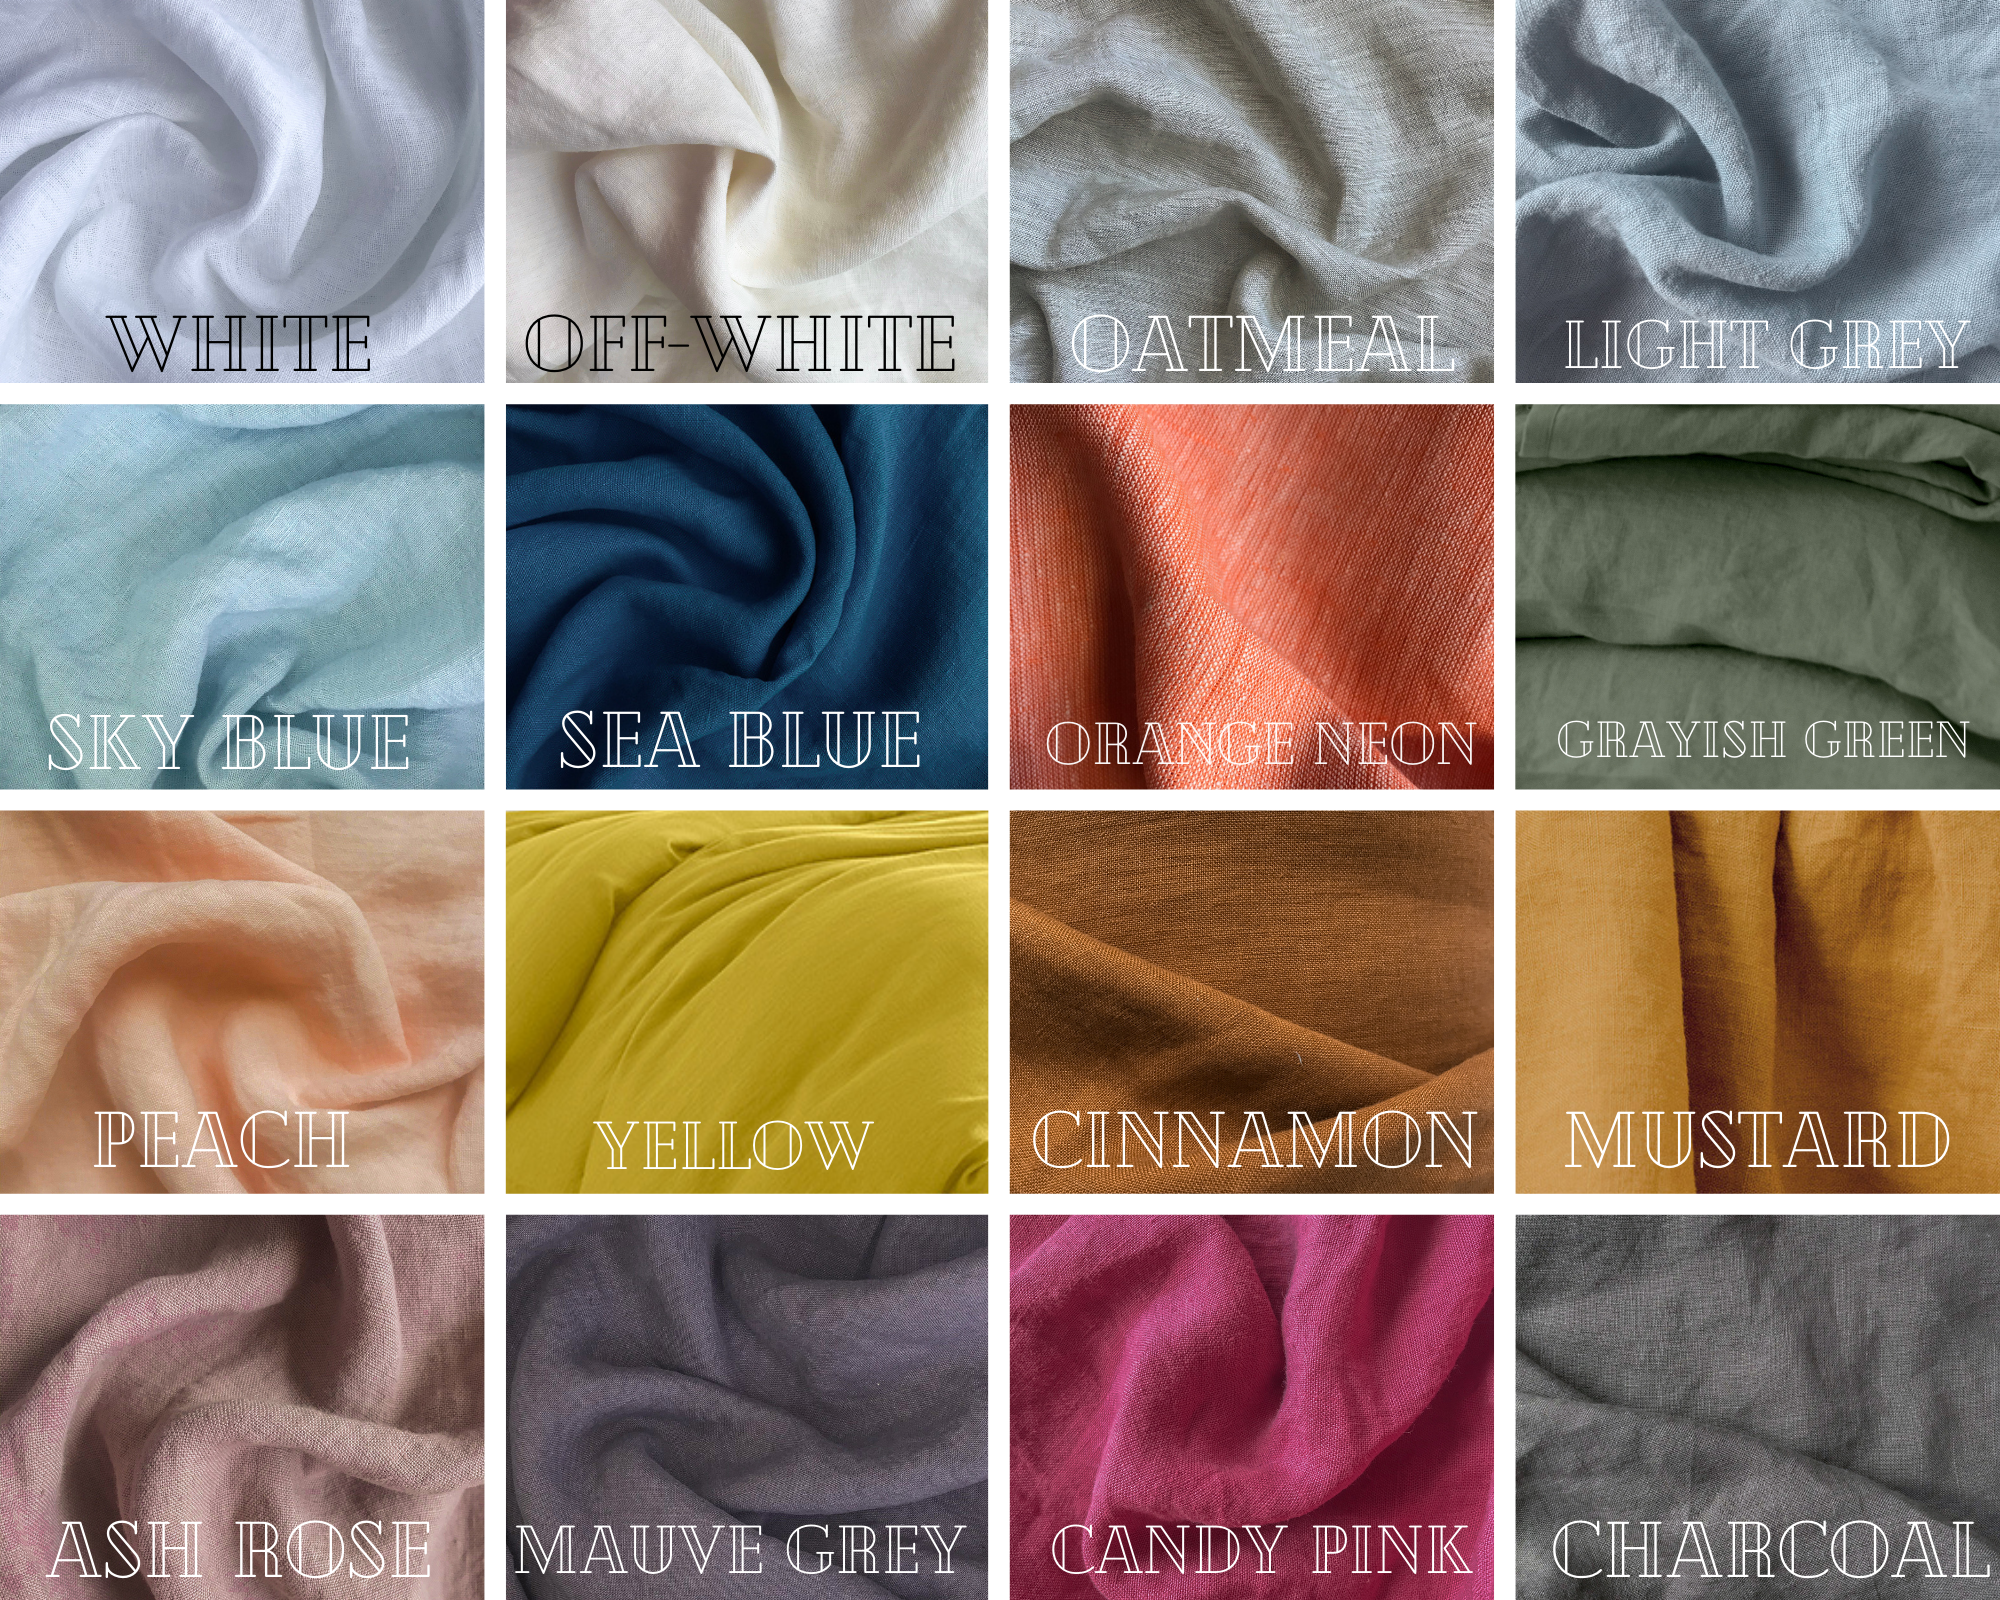 Linen Fabric Remnants for Your Projects